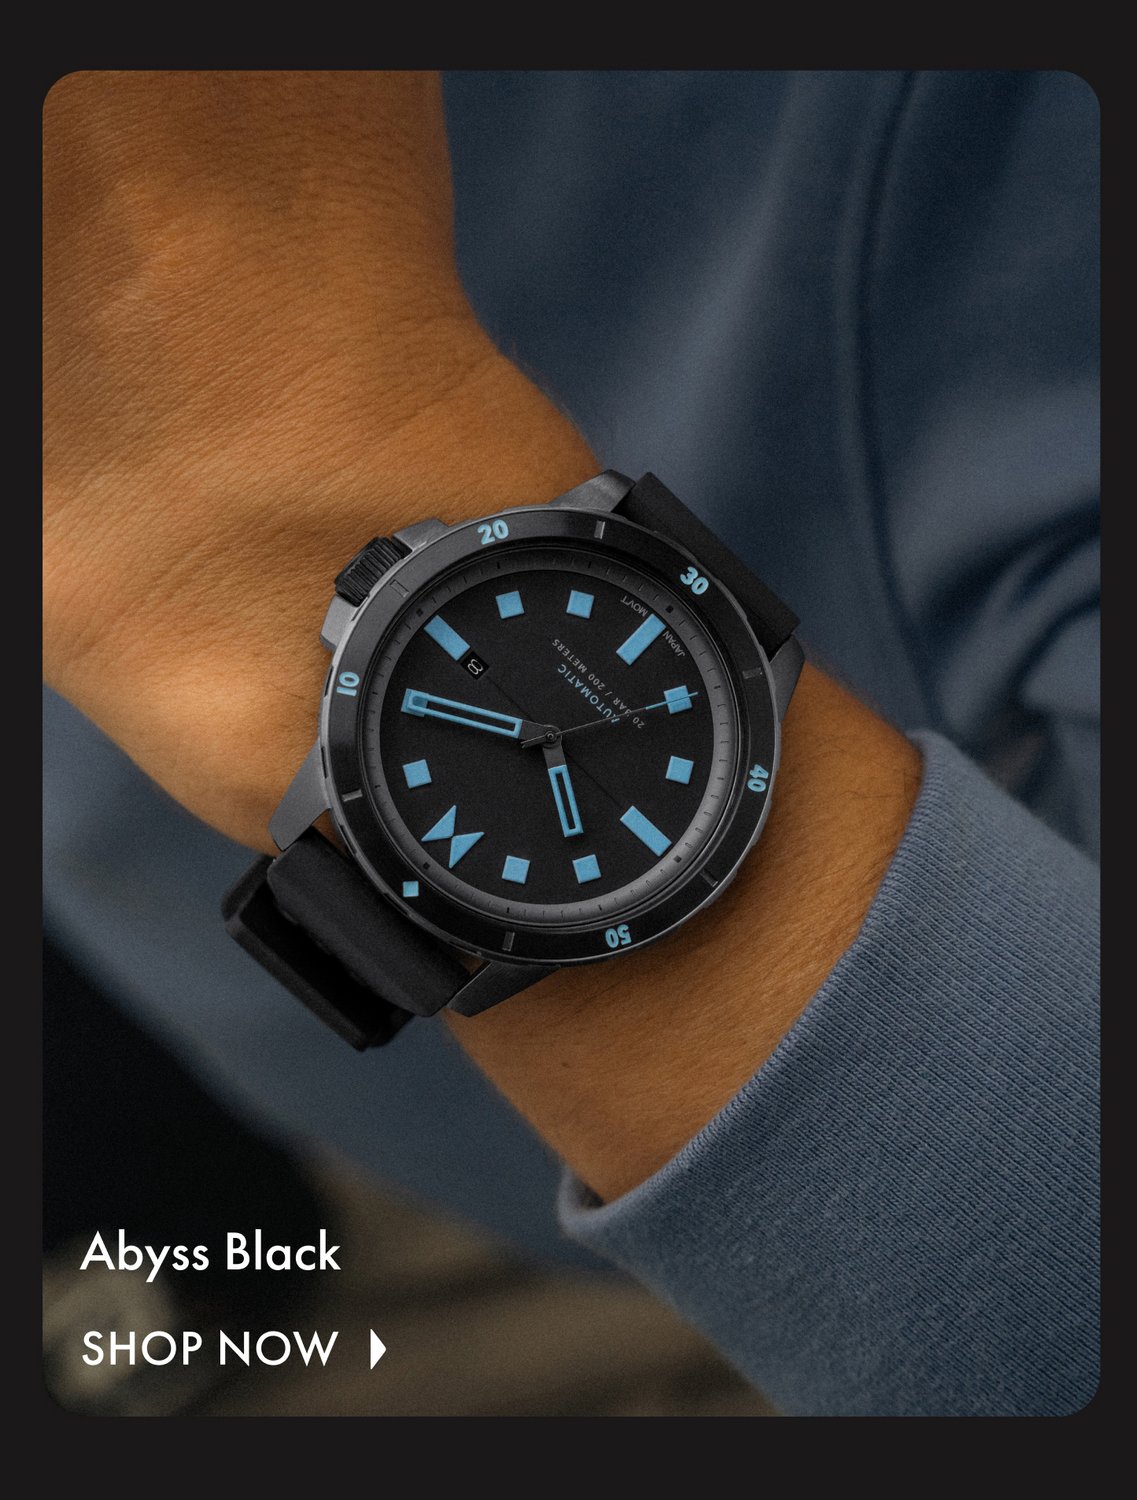 MVMT abyss black automatic watch